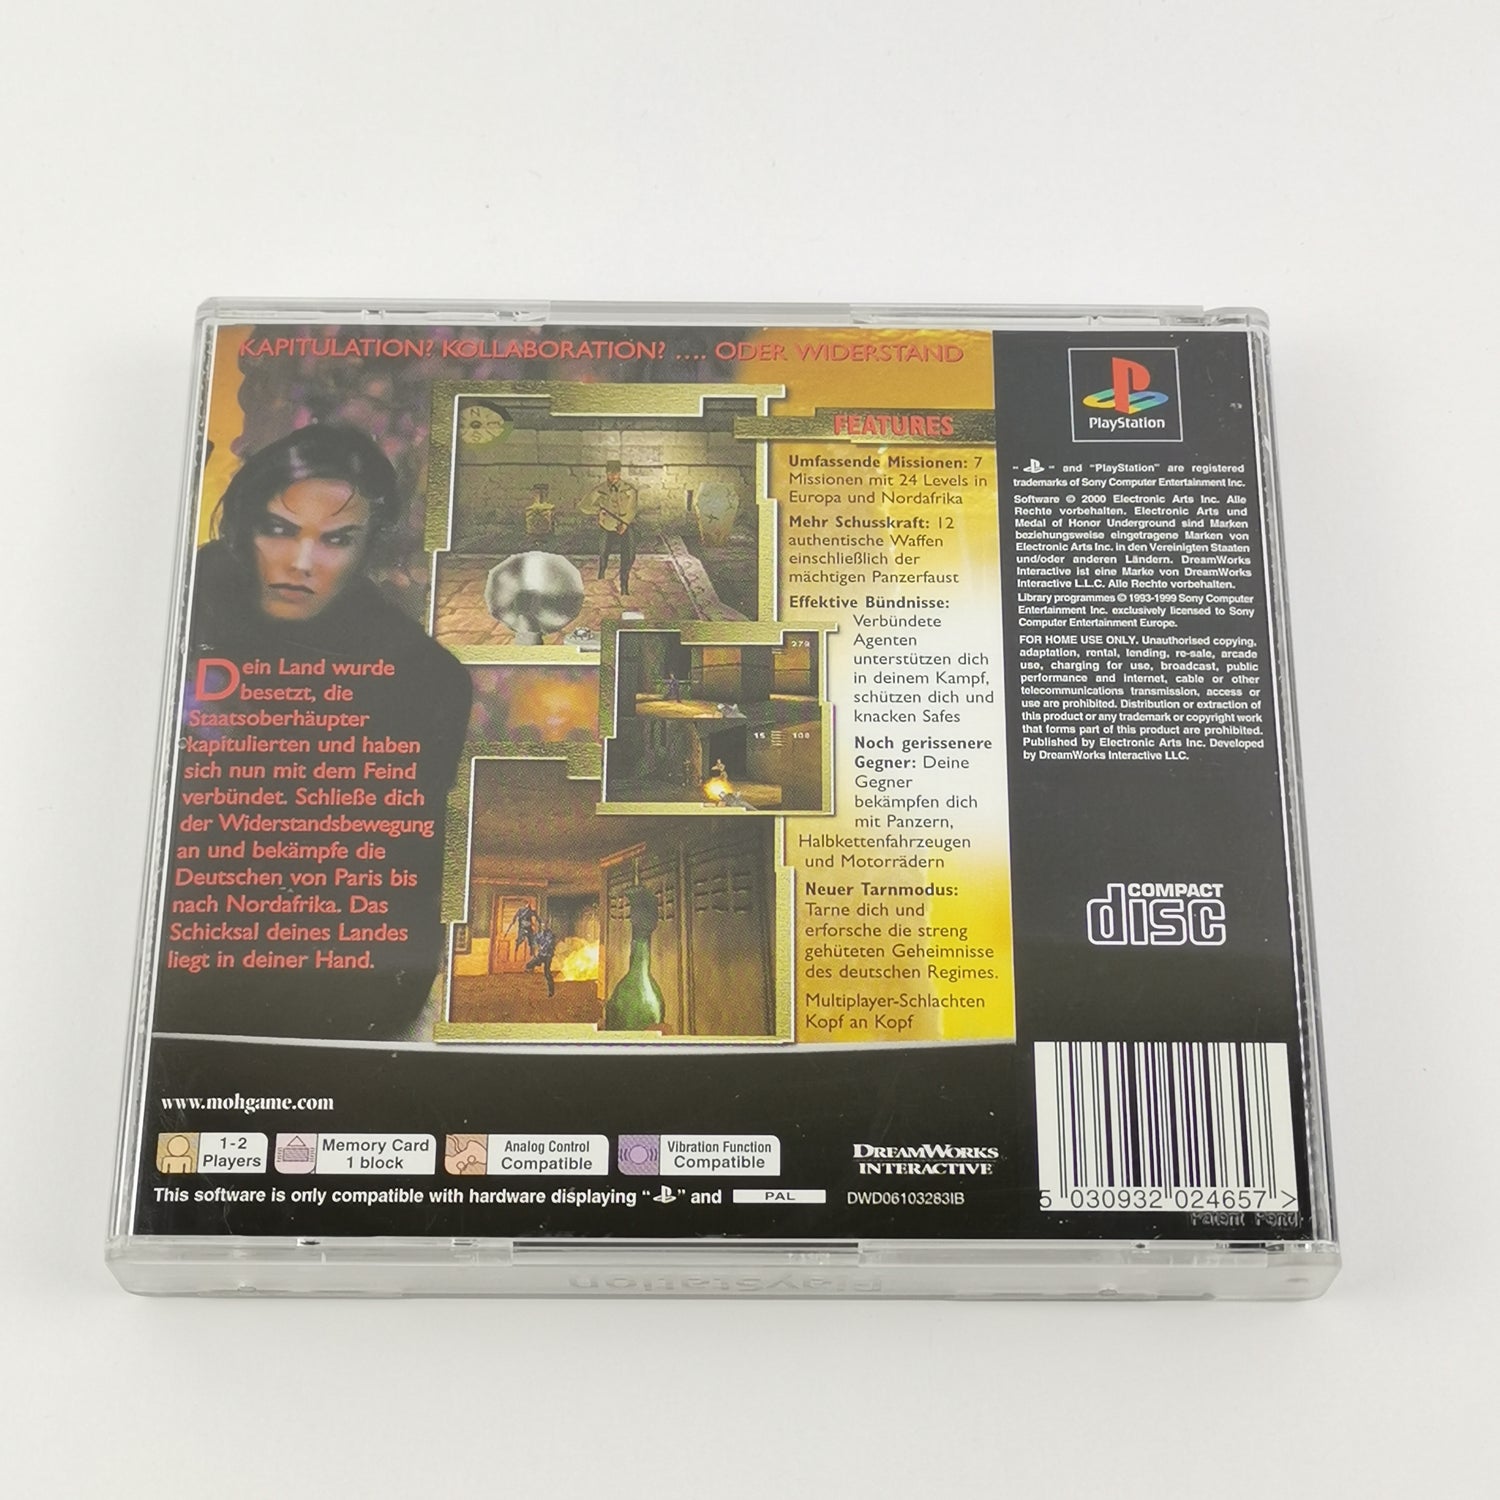 Sony Playstation 1 Spiel : Medal of Honor Underground - OVP & Anleitung PAL PS1